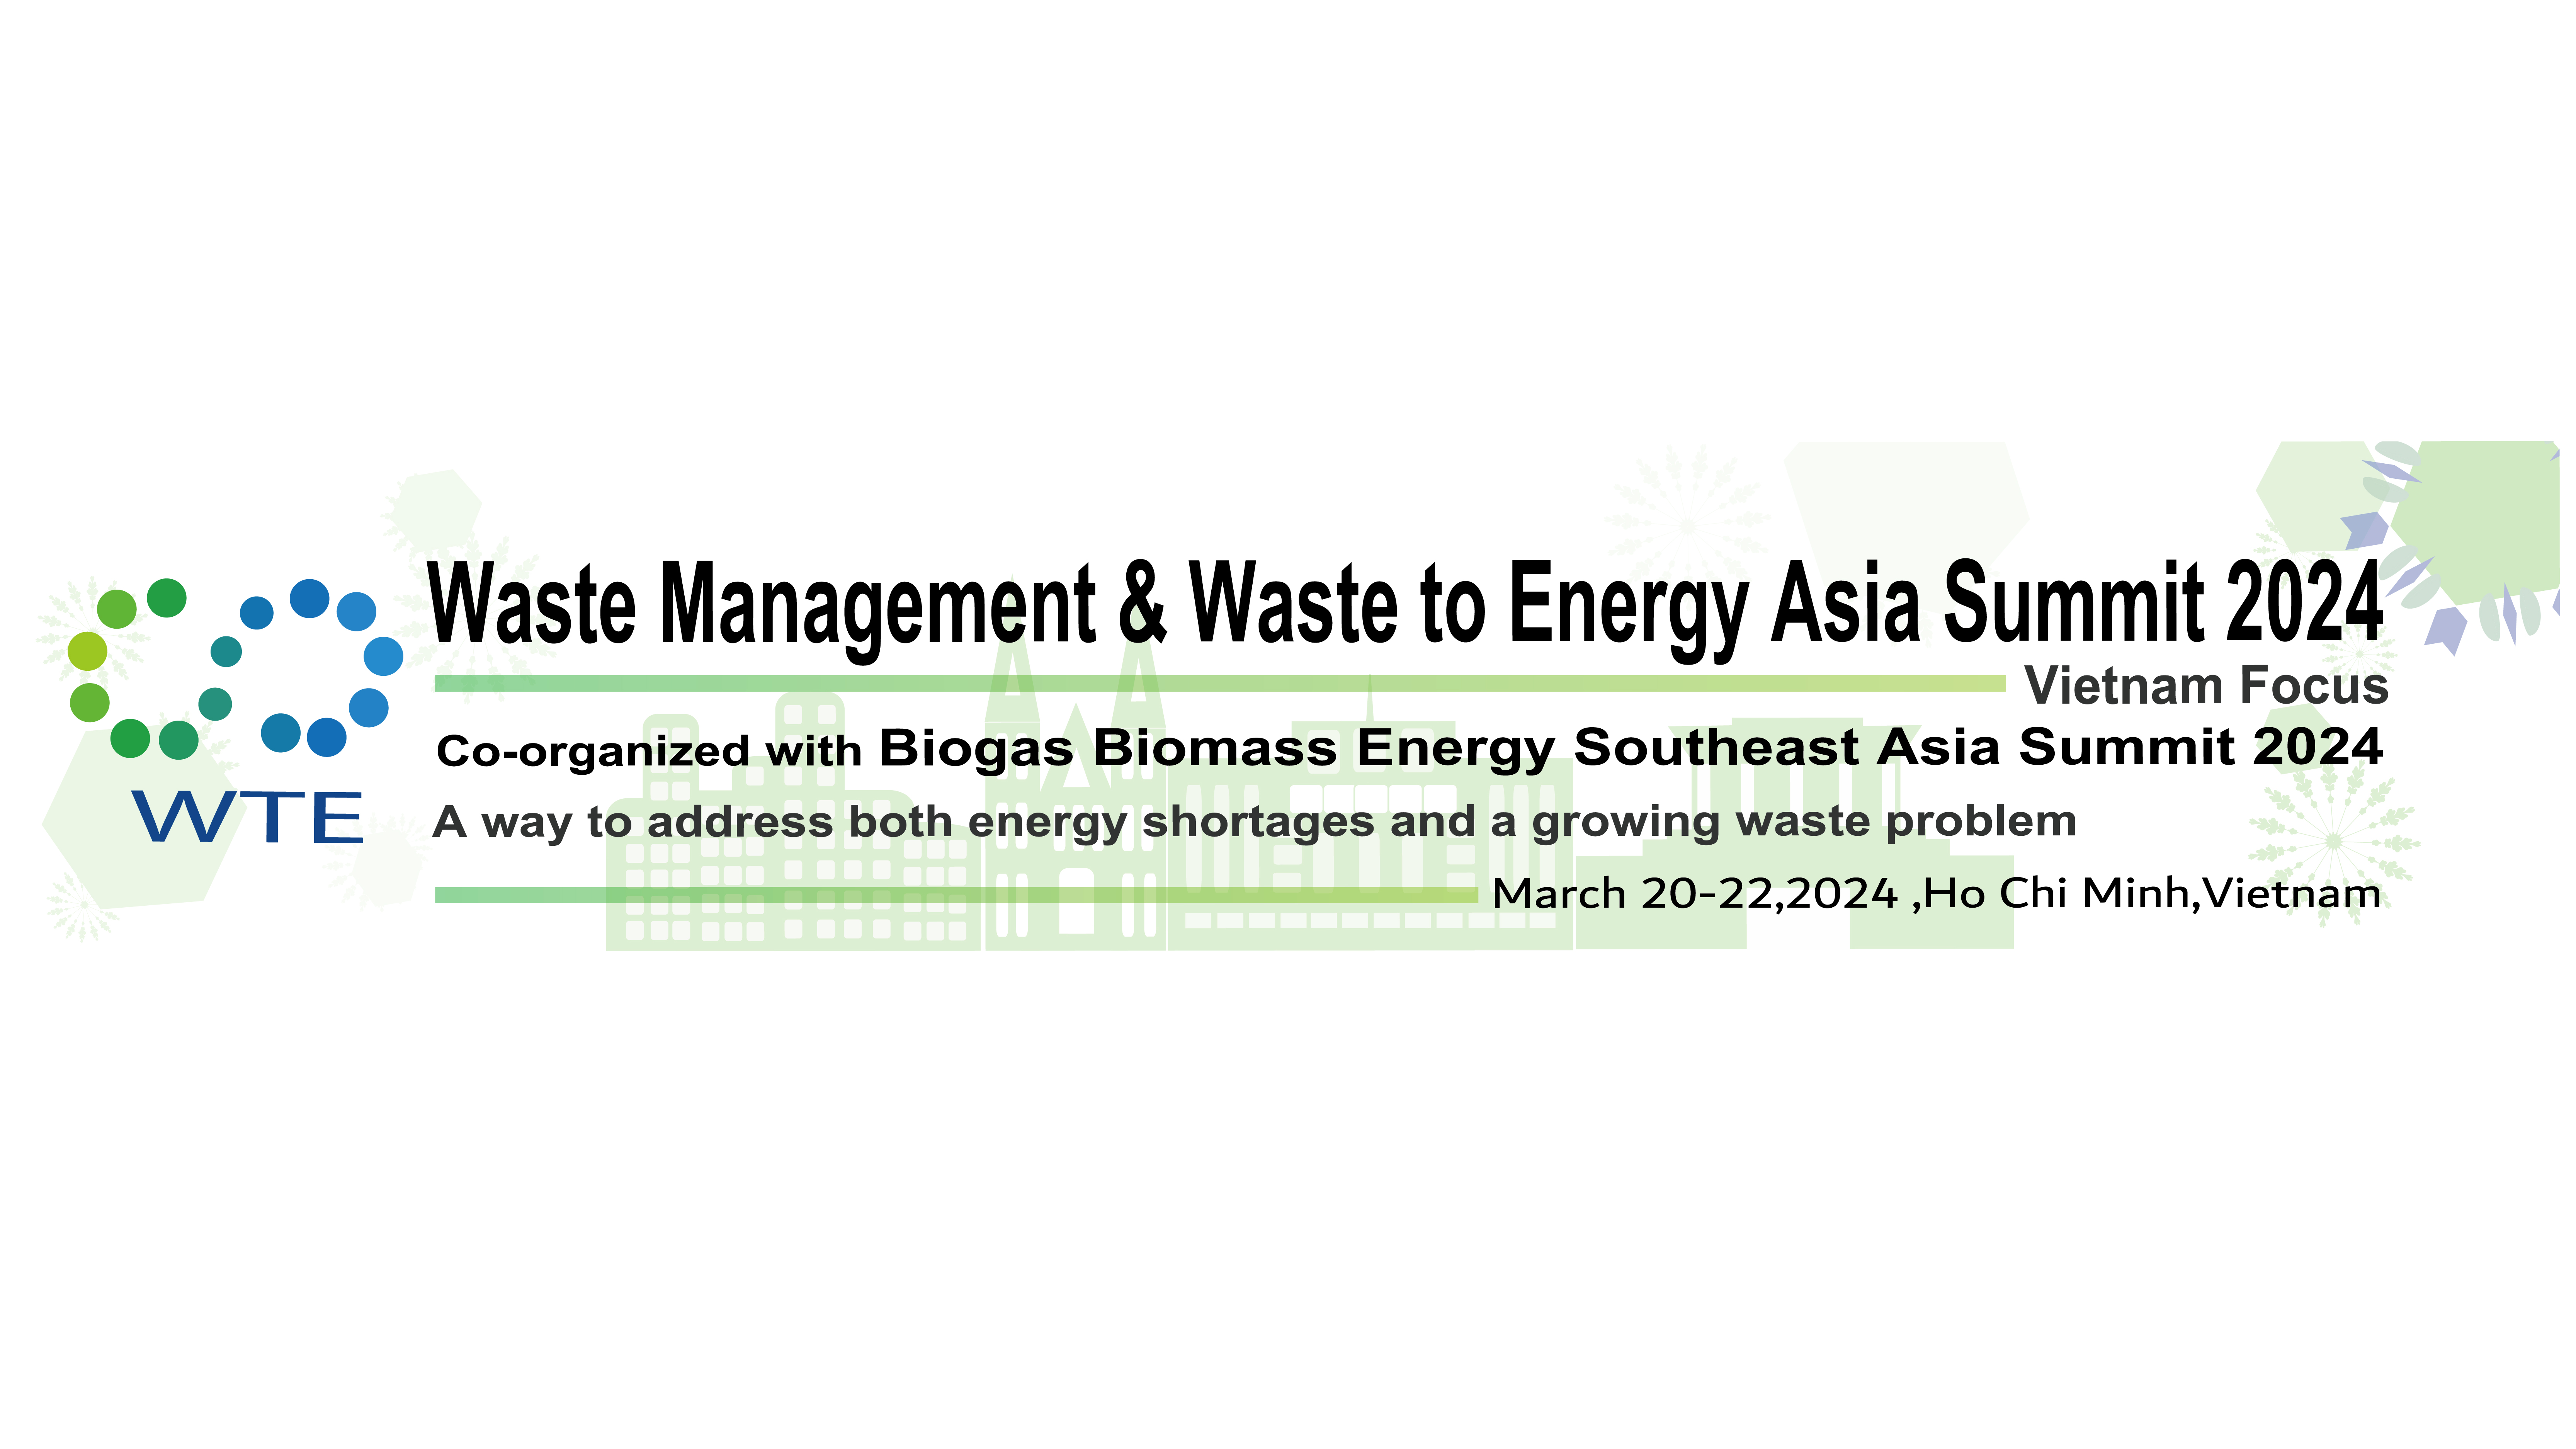 8th Waste Management &Waste to Energy Asia Summit 2024 Vietnam Focus, Ho Chi Minh City, Ho Chi Minh, Vietnam